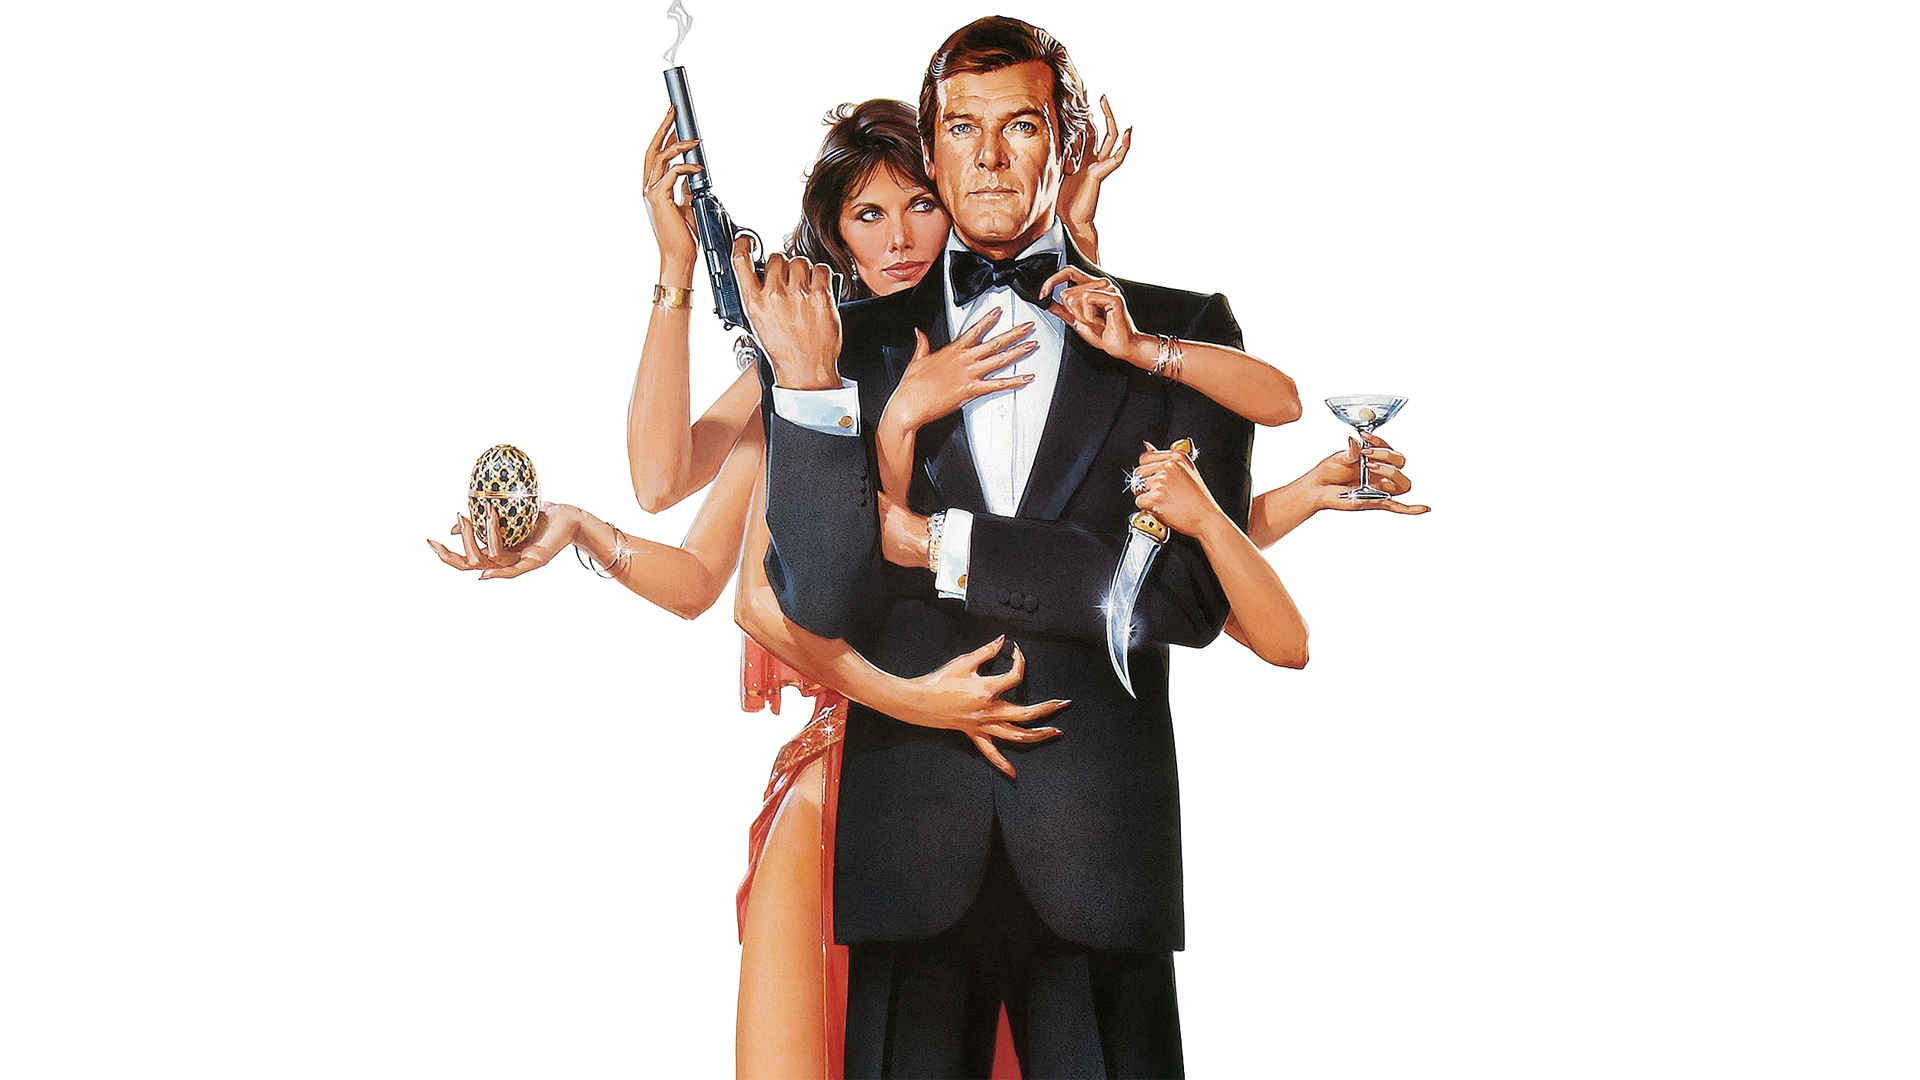 roger moore, movie, octopussy, james bond, maud adams, octopussy (character)